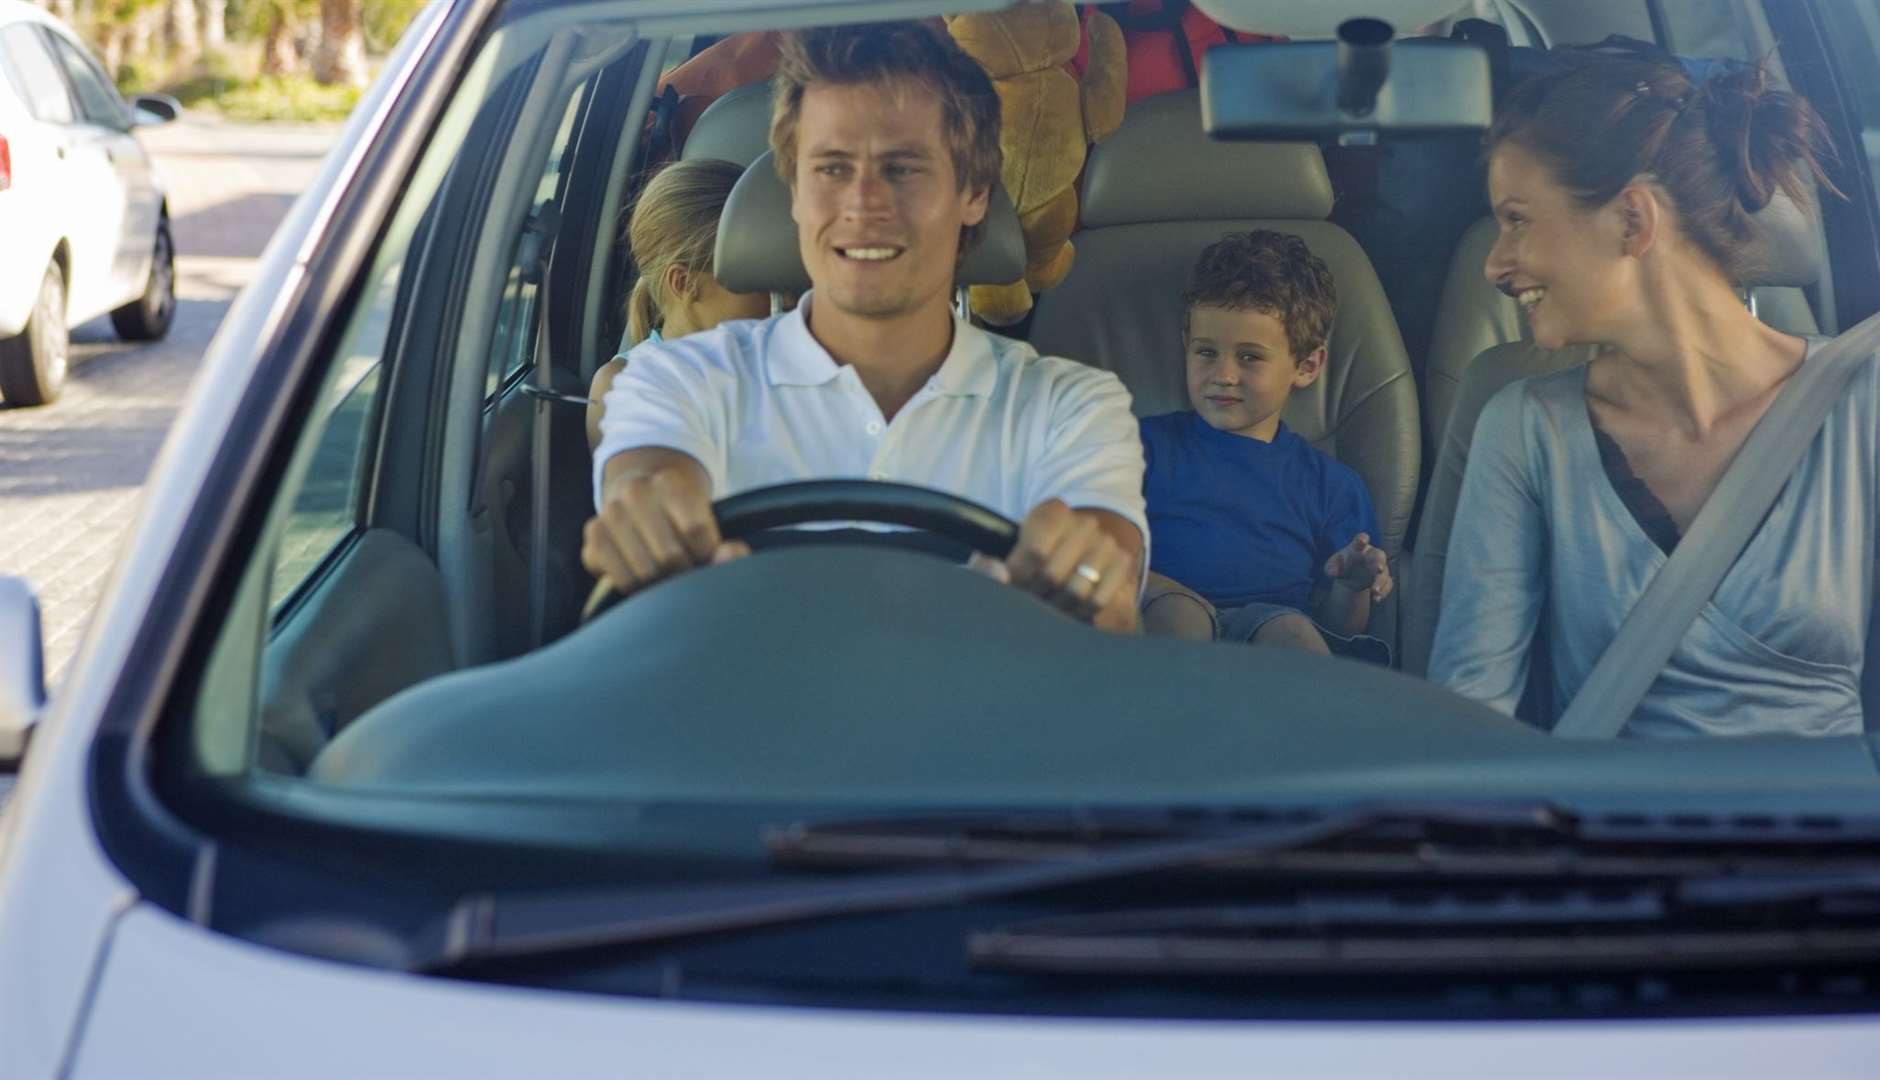 Before setting off families should check their car insurance policies cover any additions to their car's load